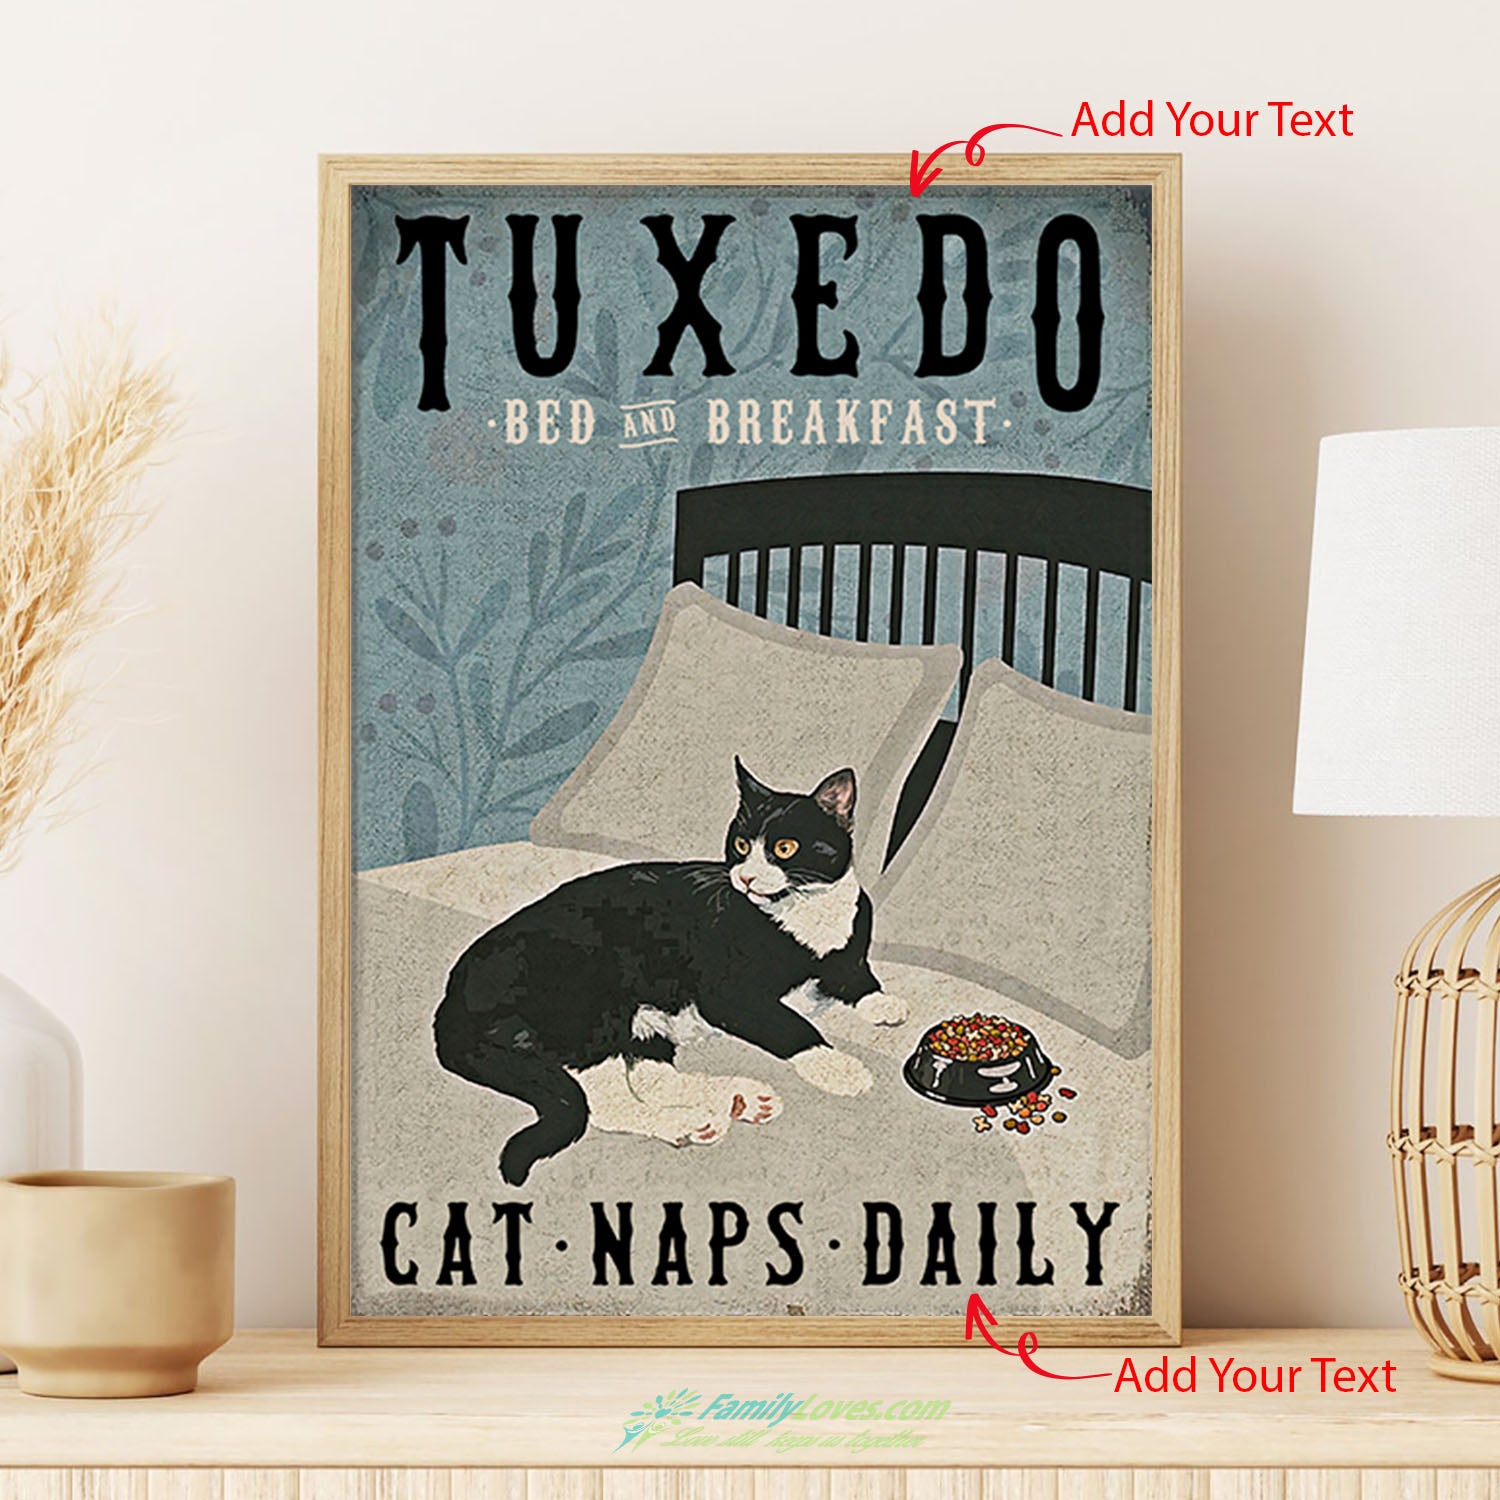 Tuxedo Bed And Breakfast Cat Naps Daily Canvas Wall Decor Poster Of A Window All Size 1